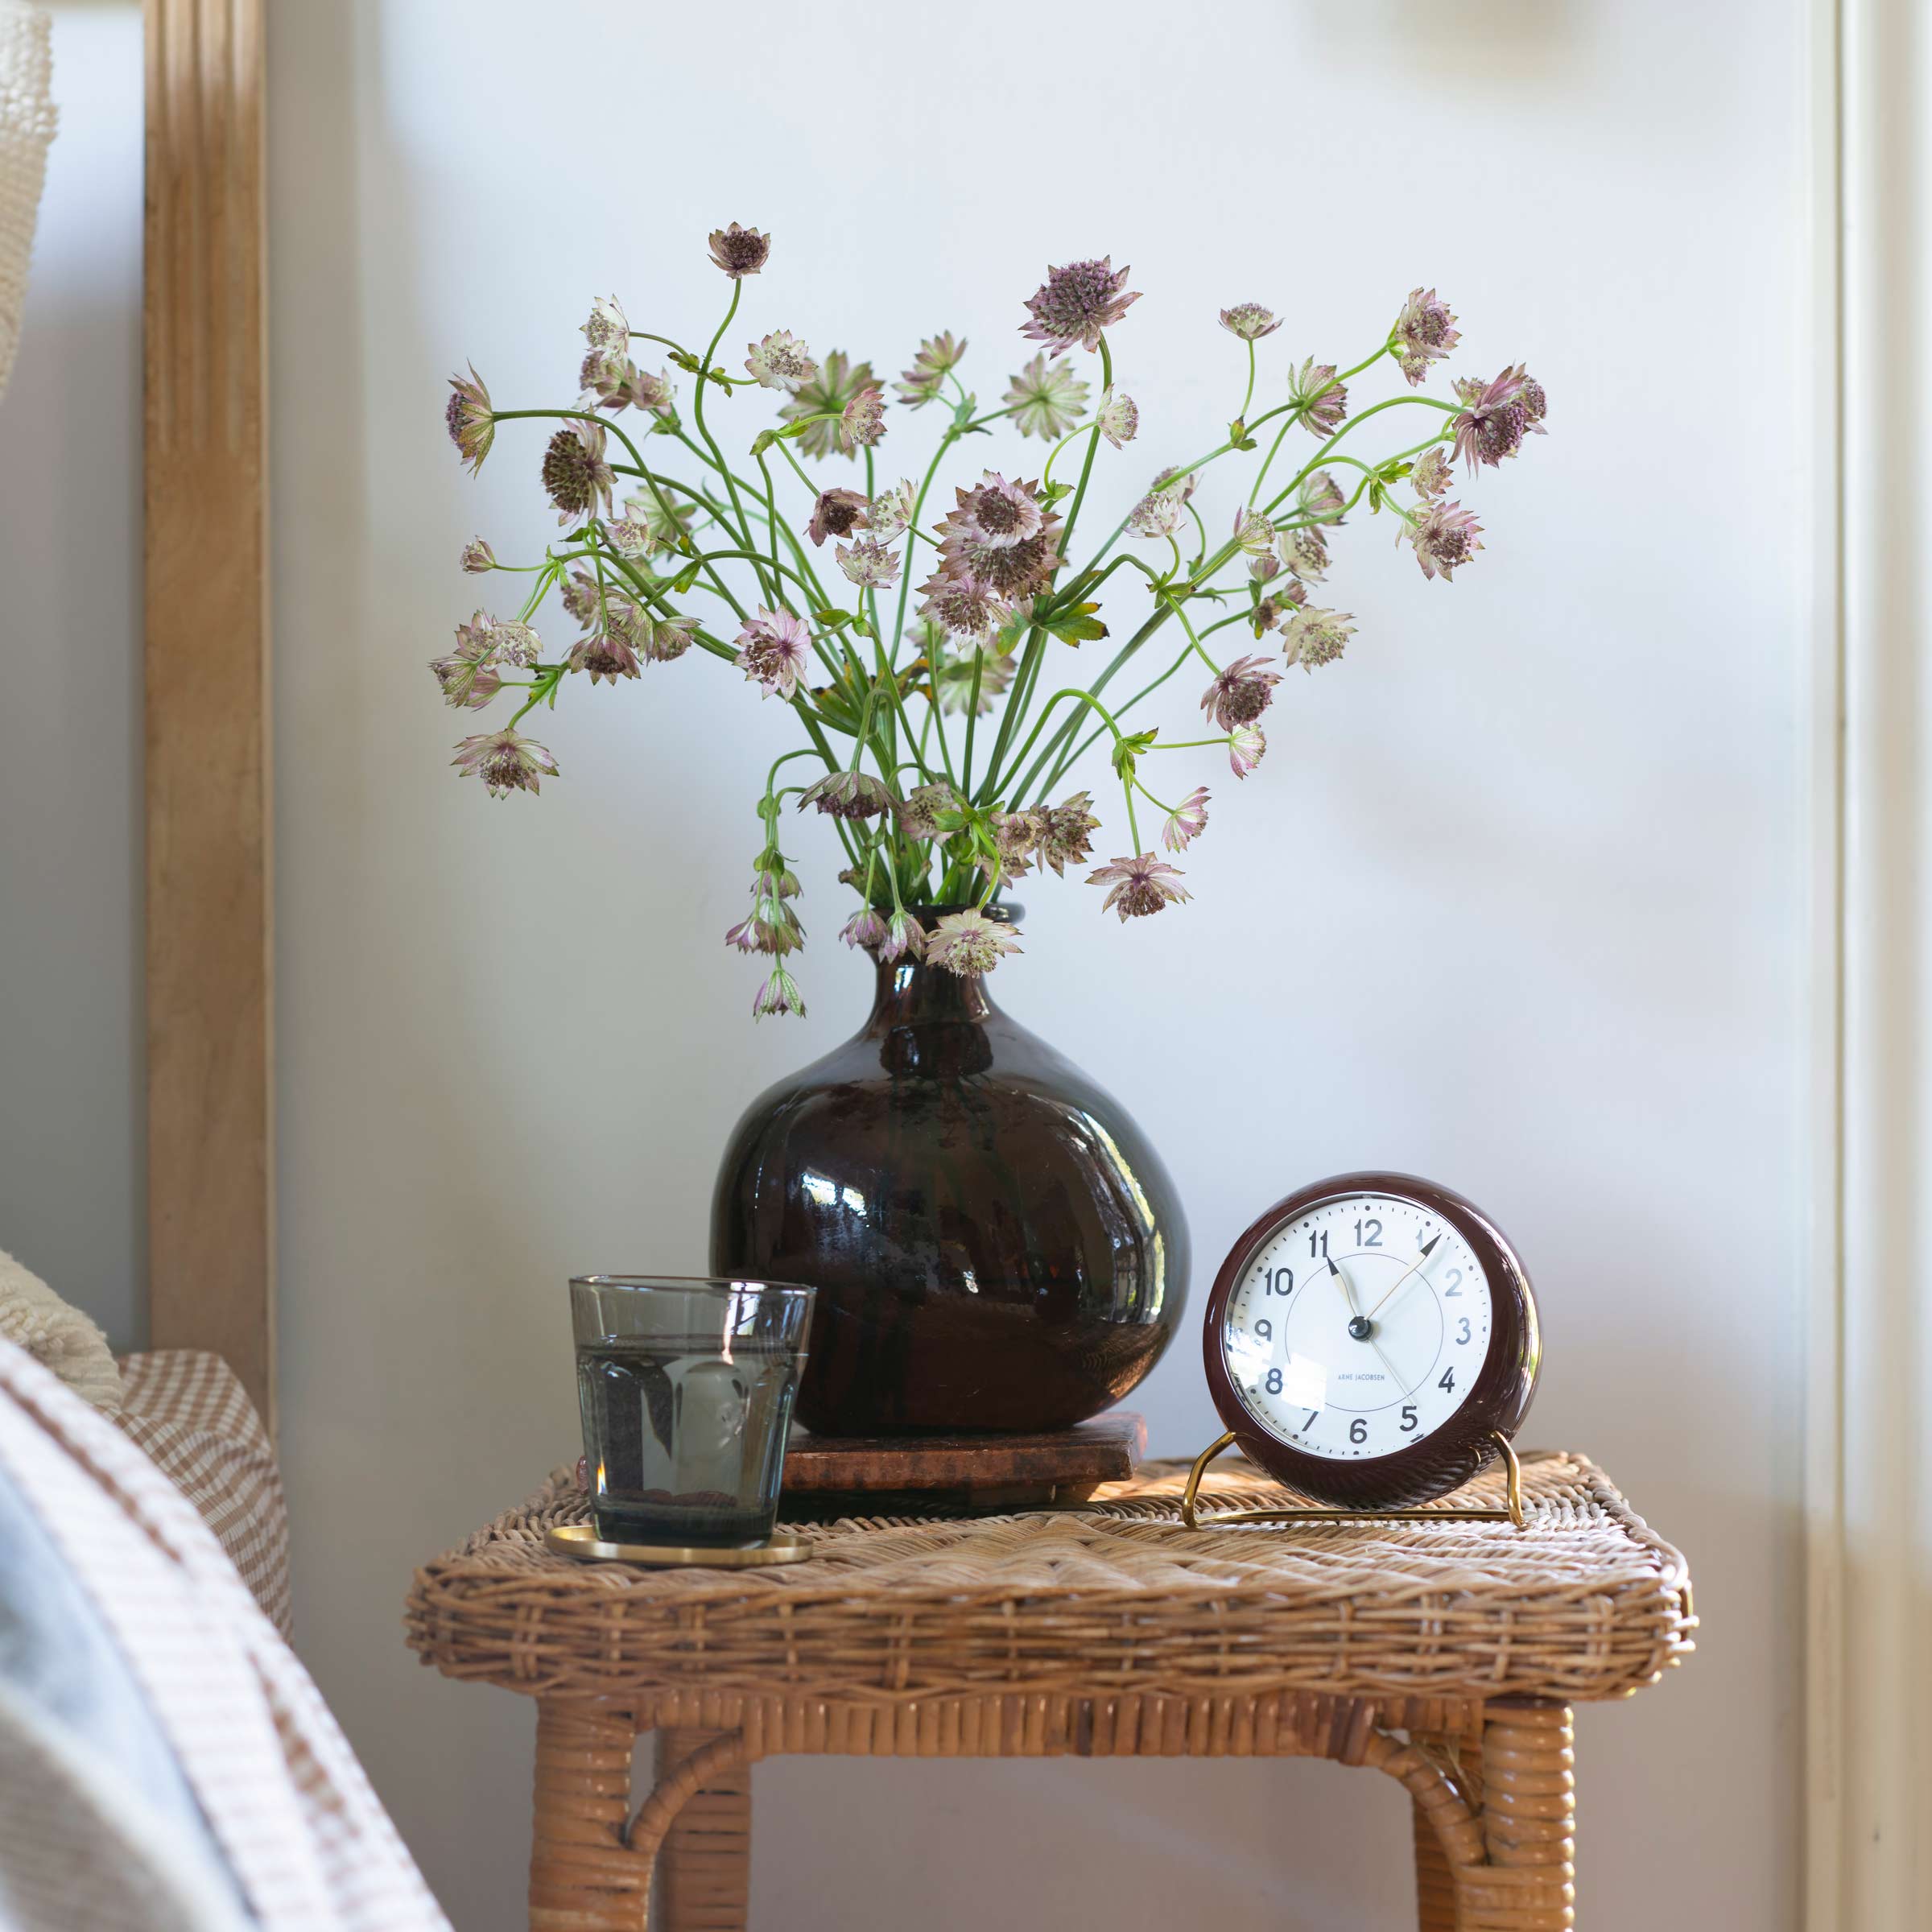 Wicker side table with flowers in a vase, glass of water, and a burgundy alarm clock.